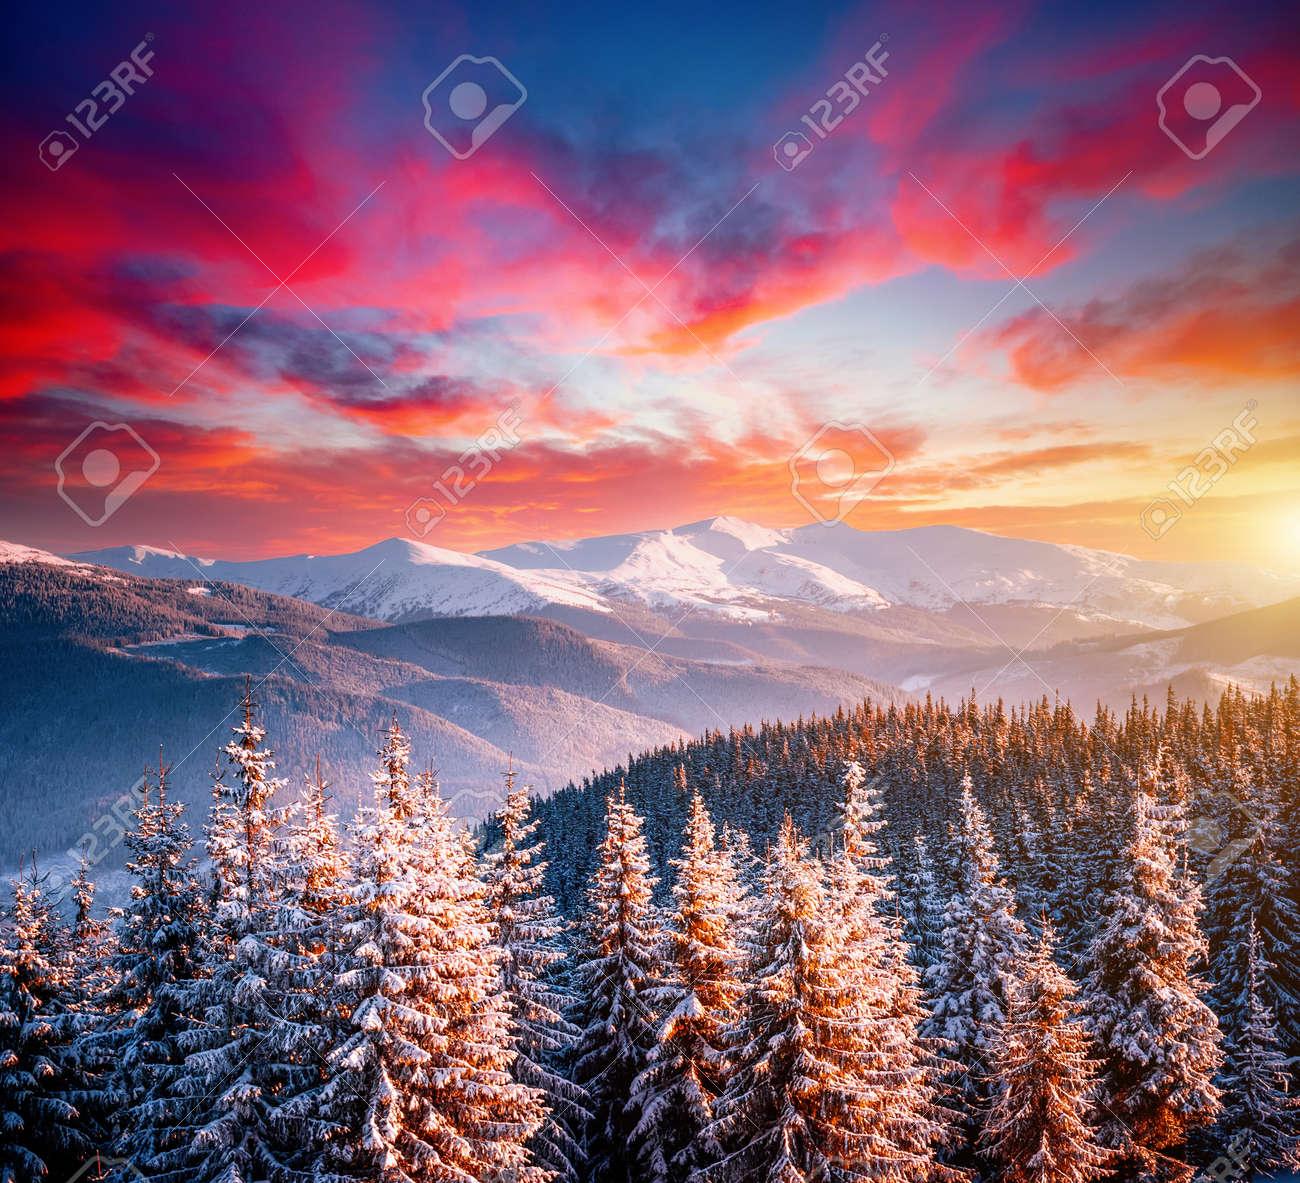 Incredible Winter Spruces In Snow On A Frosty Day Location Place